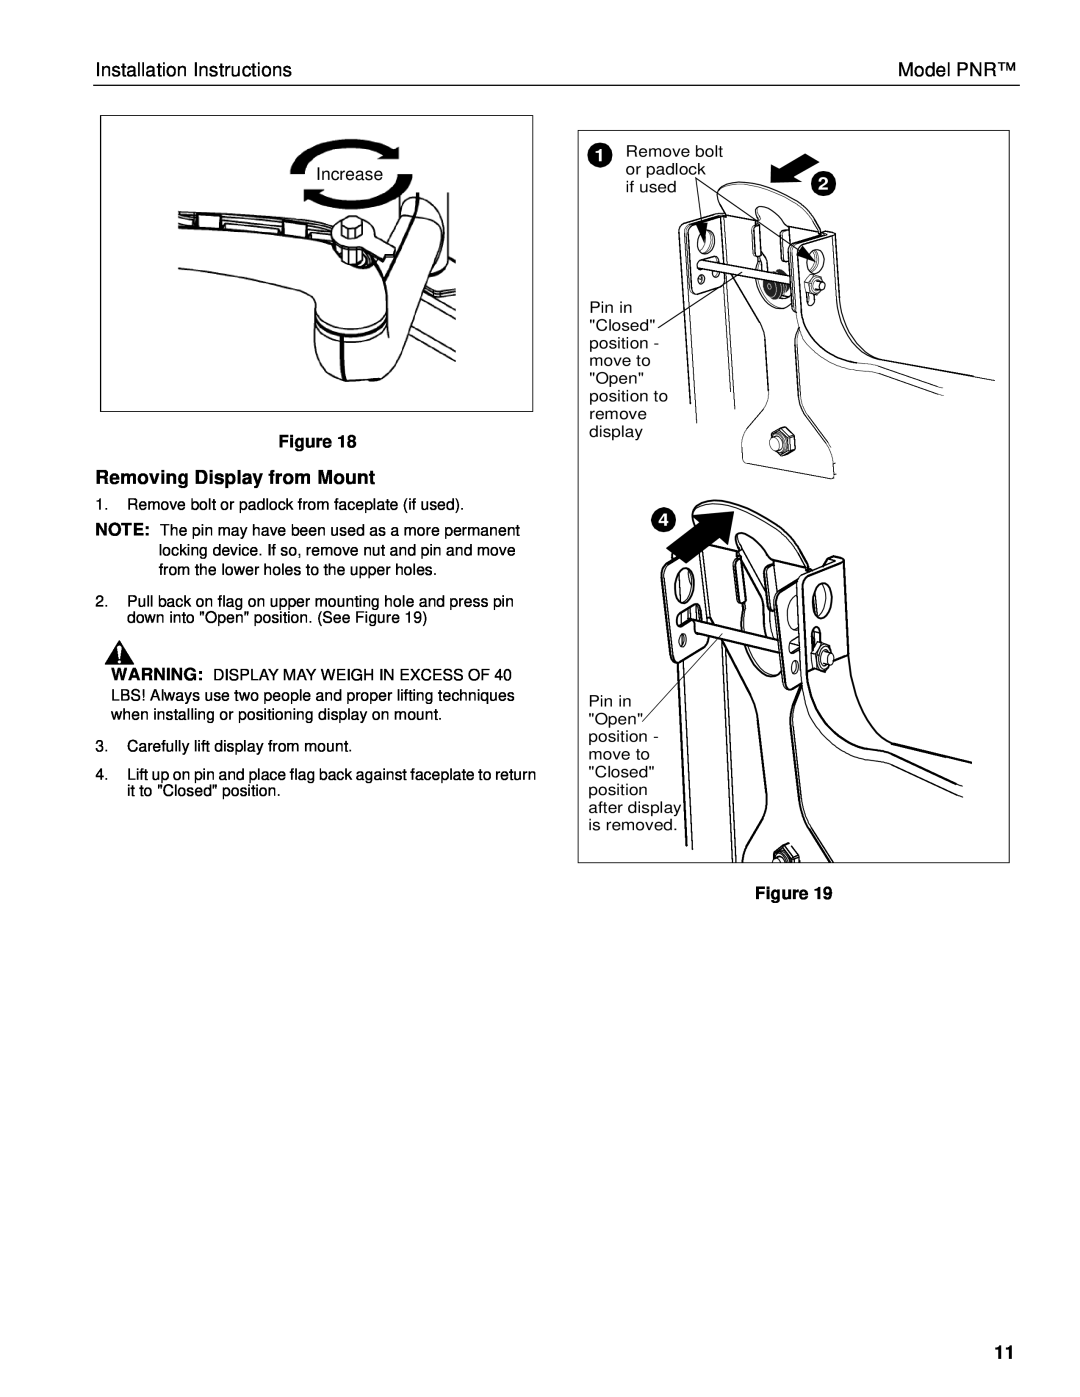 Chief Manufacturing PNR installation instructions Removing Display from Mount, Increase 